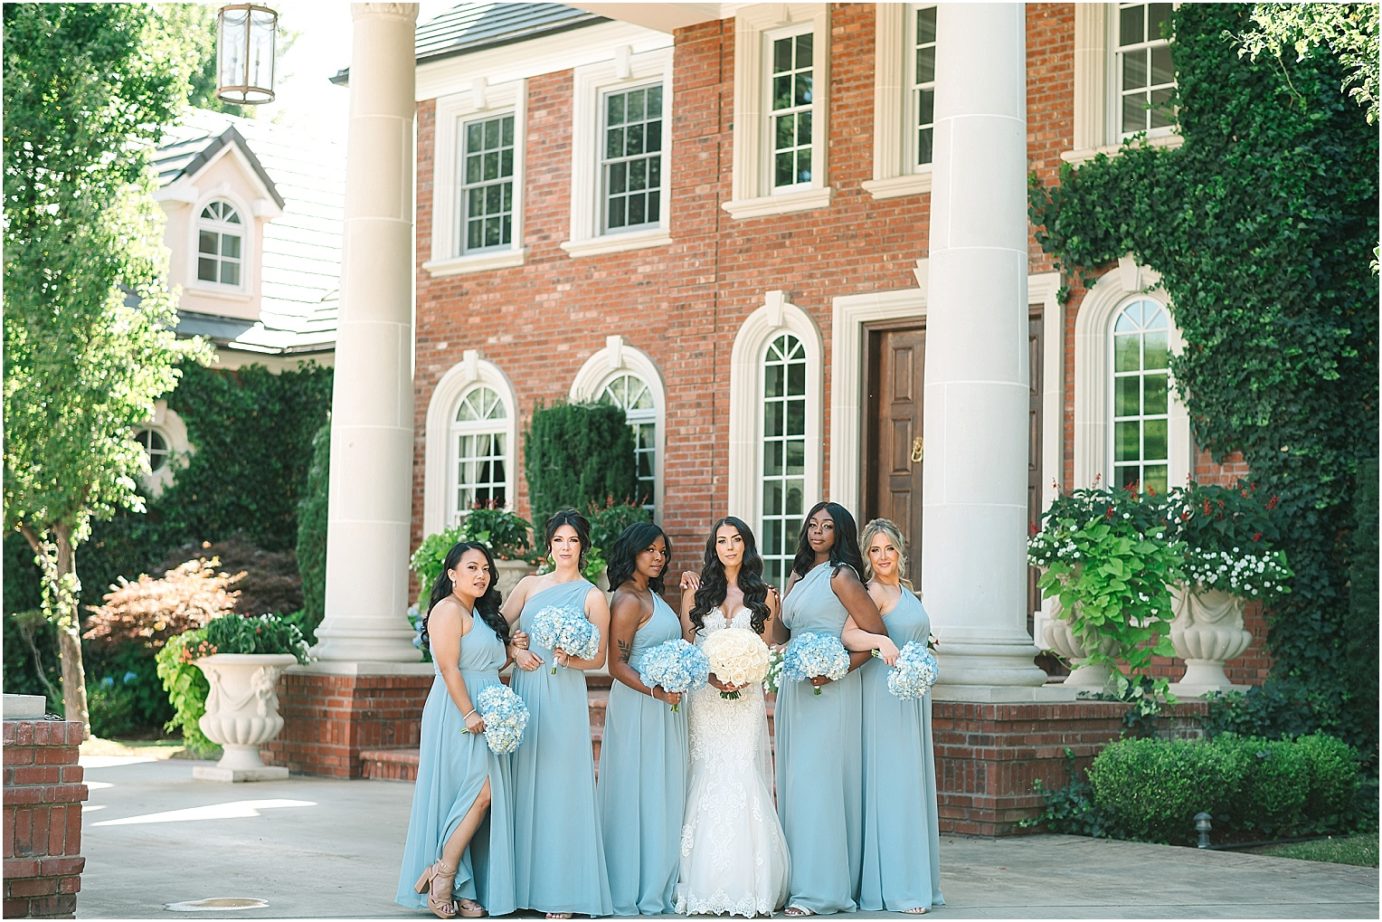 Disney-inspired Oakshire Estate Wedding bride and bridesmaids in vanity fair style photo